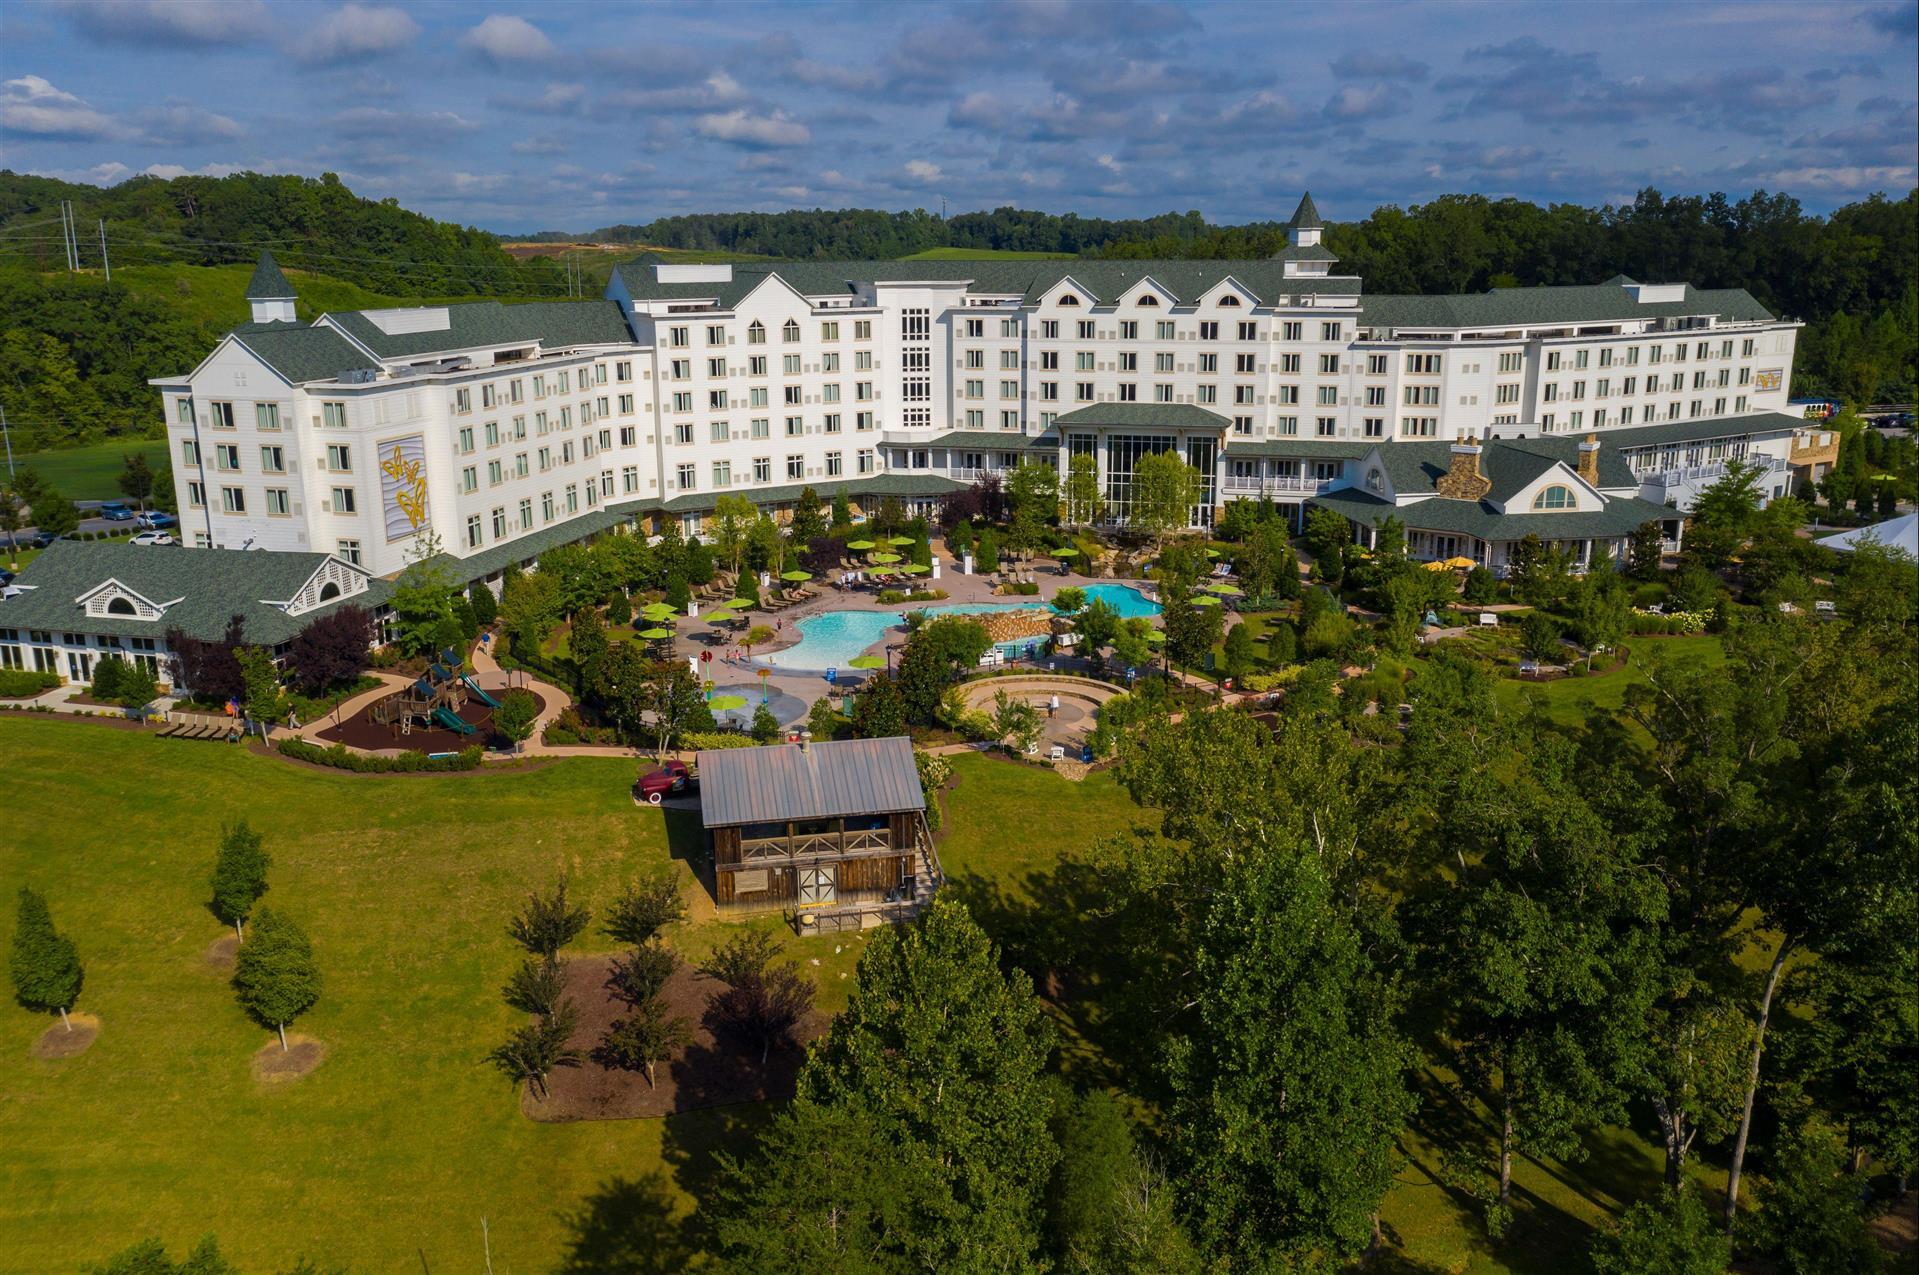 Dollywood's DreamMore Resort in Pigeon Forge, TN